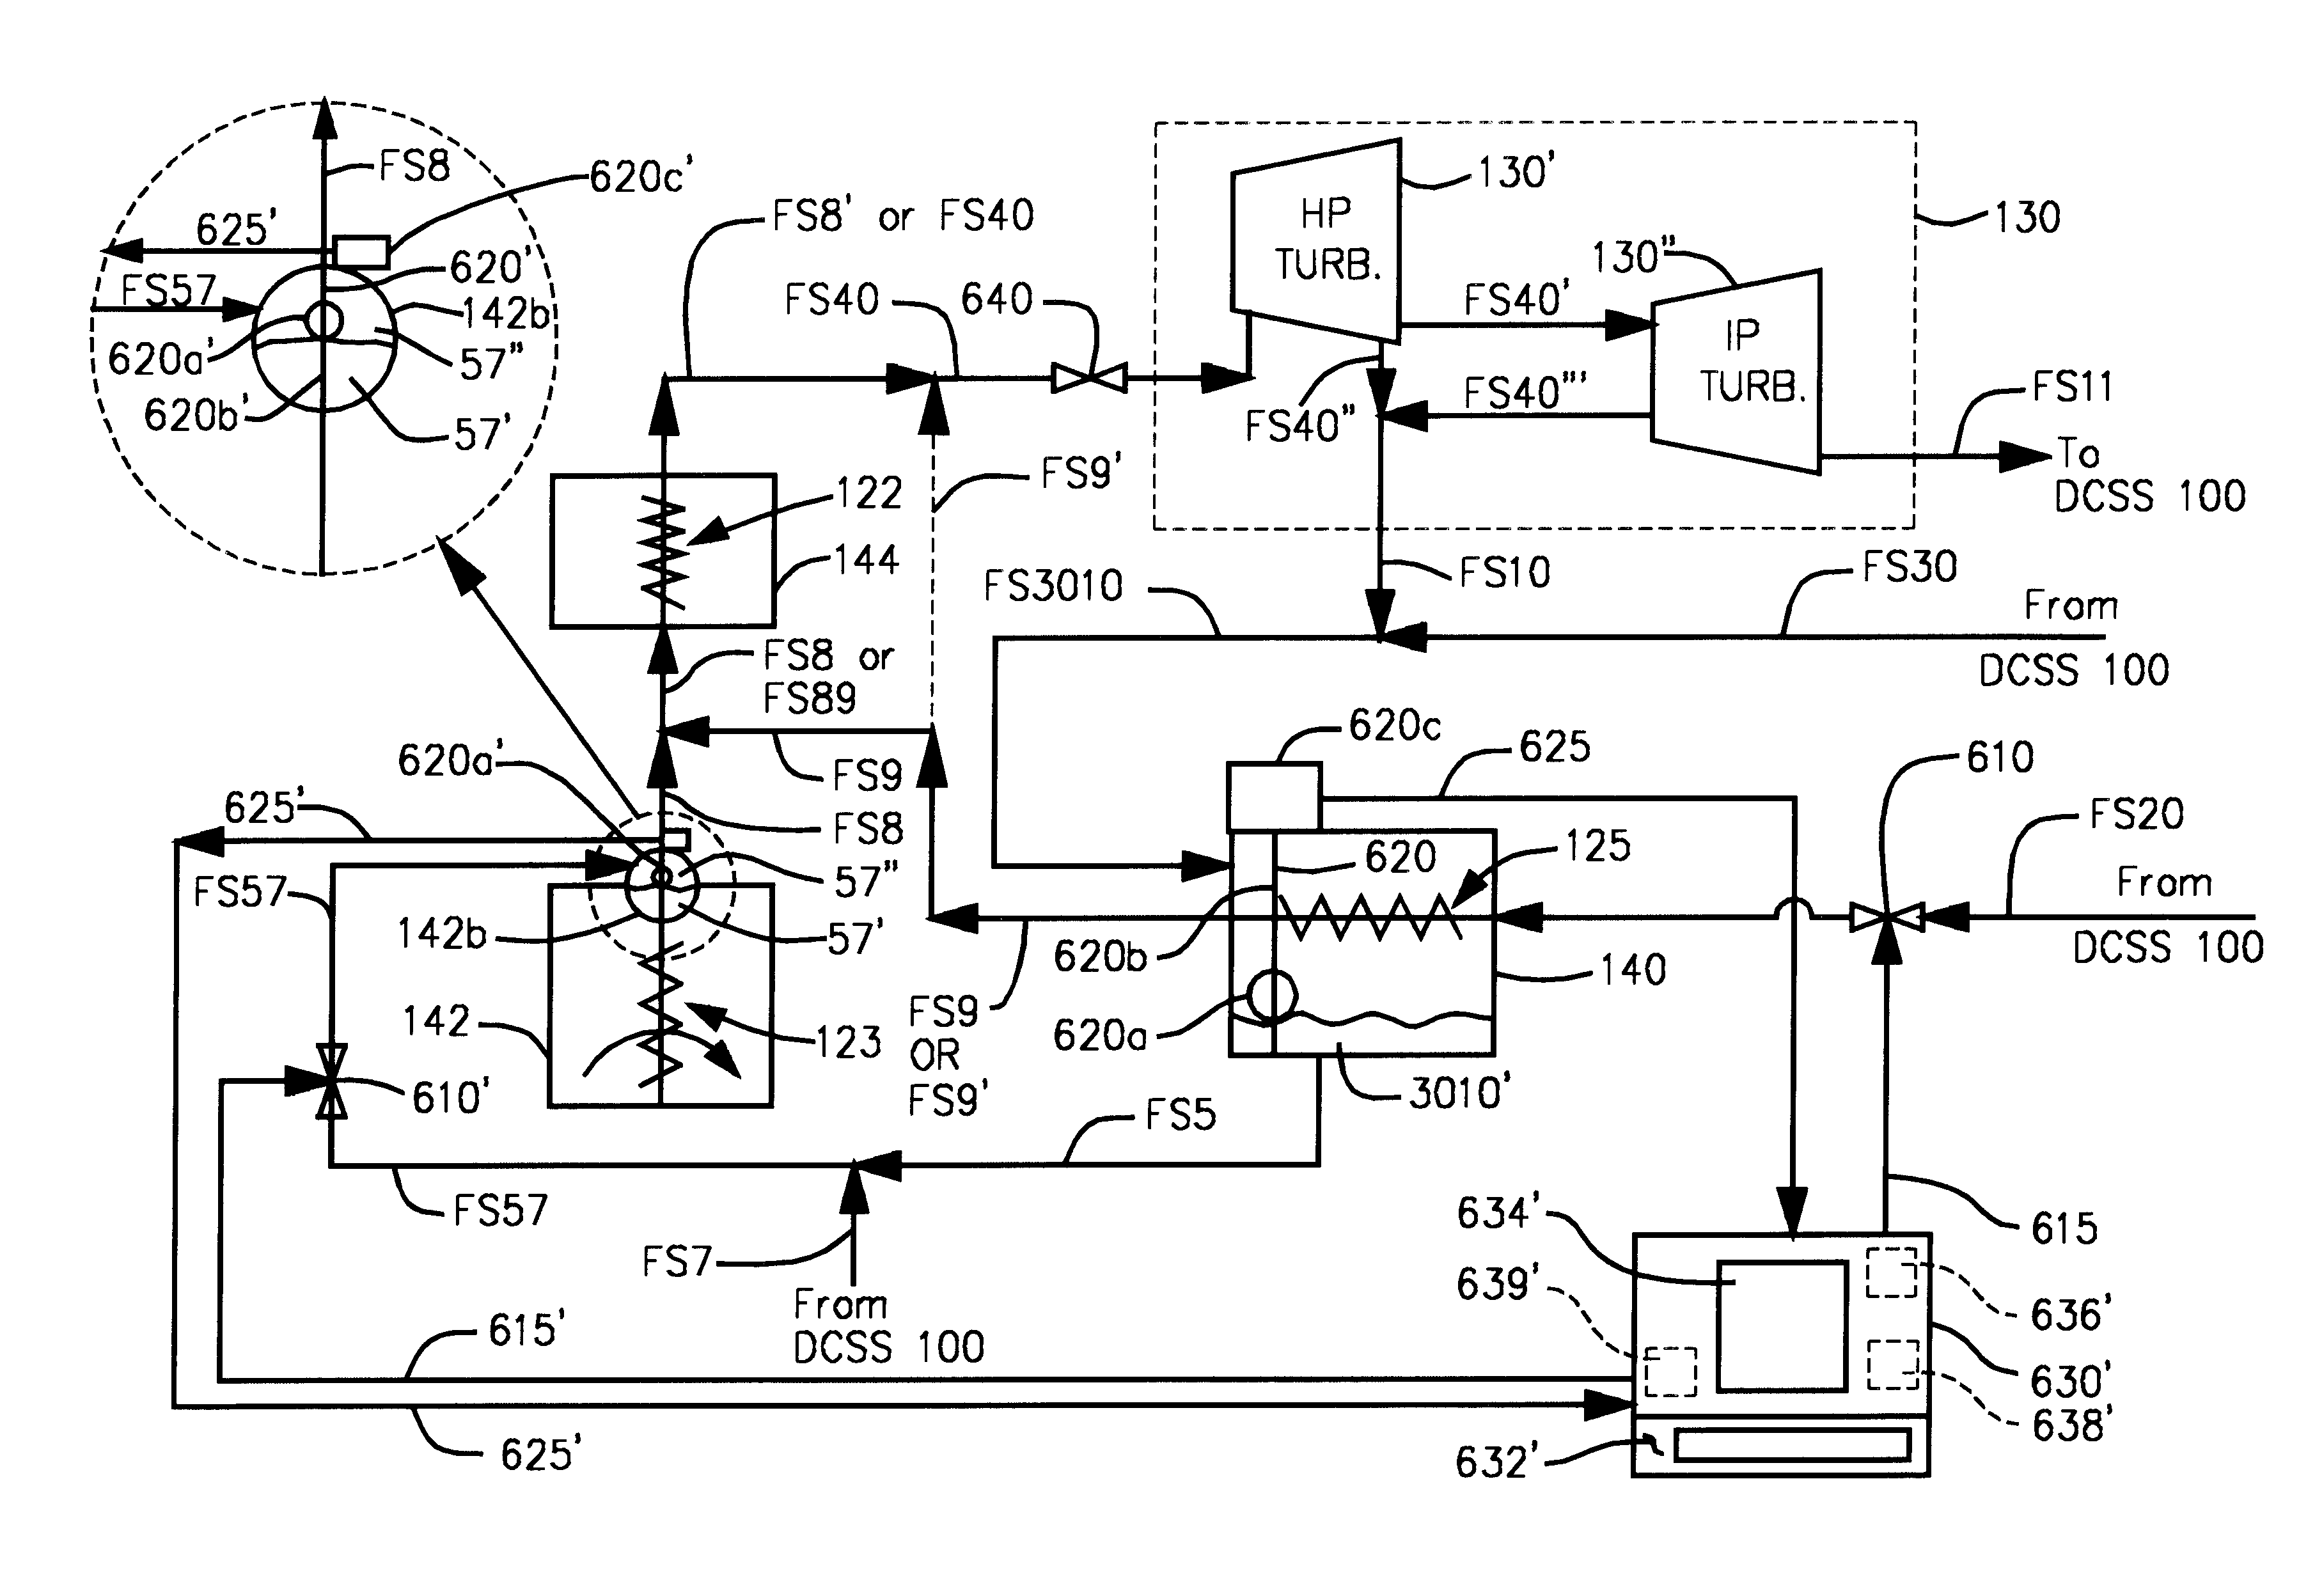 Regenerative subsystem control in a kalina cycle power generation system